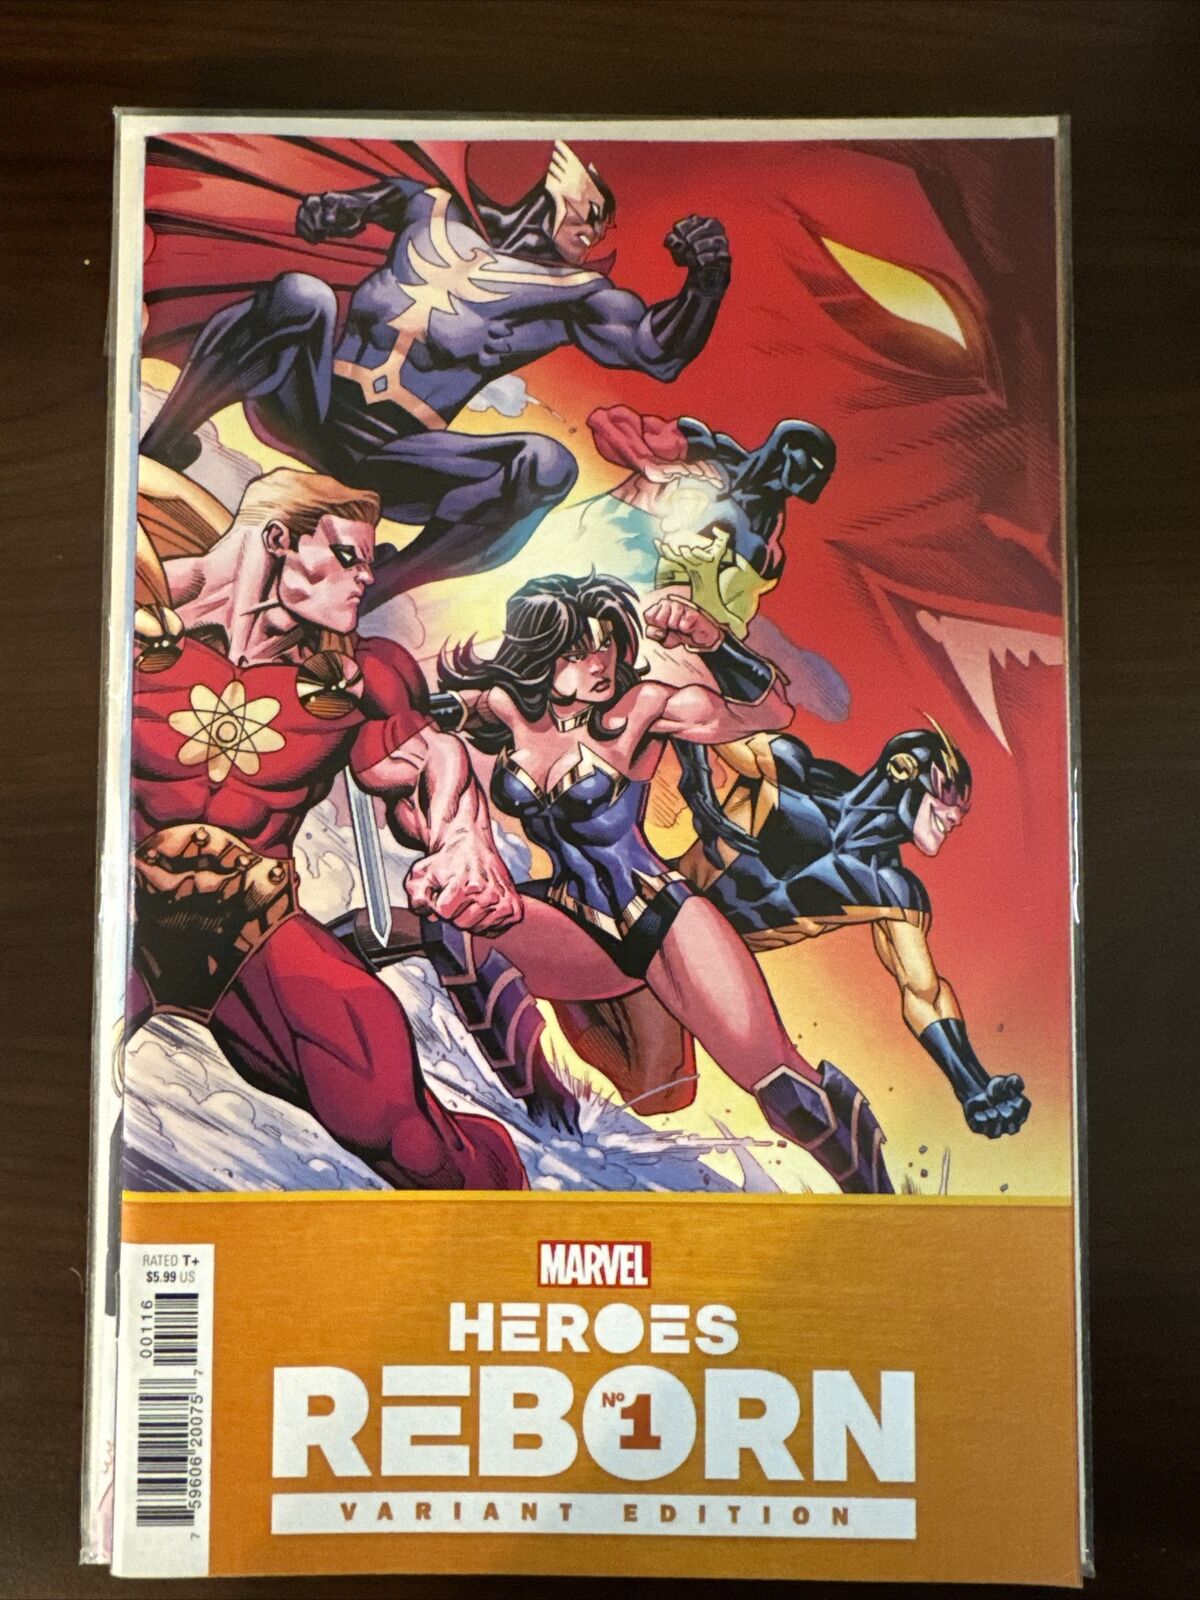 HEROES REBORN #1 (Marvel Comics 2021) -- Limited 1:25 VARIANT -- NM- Or Better